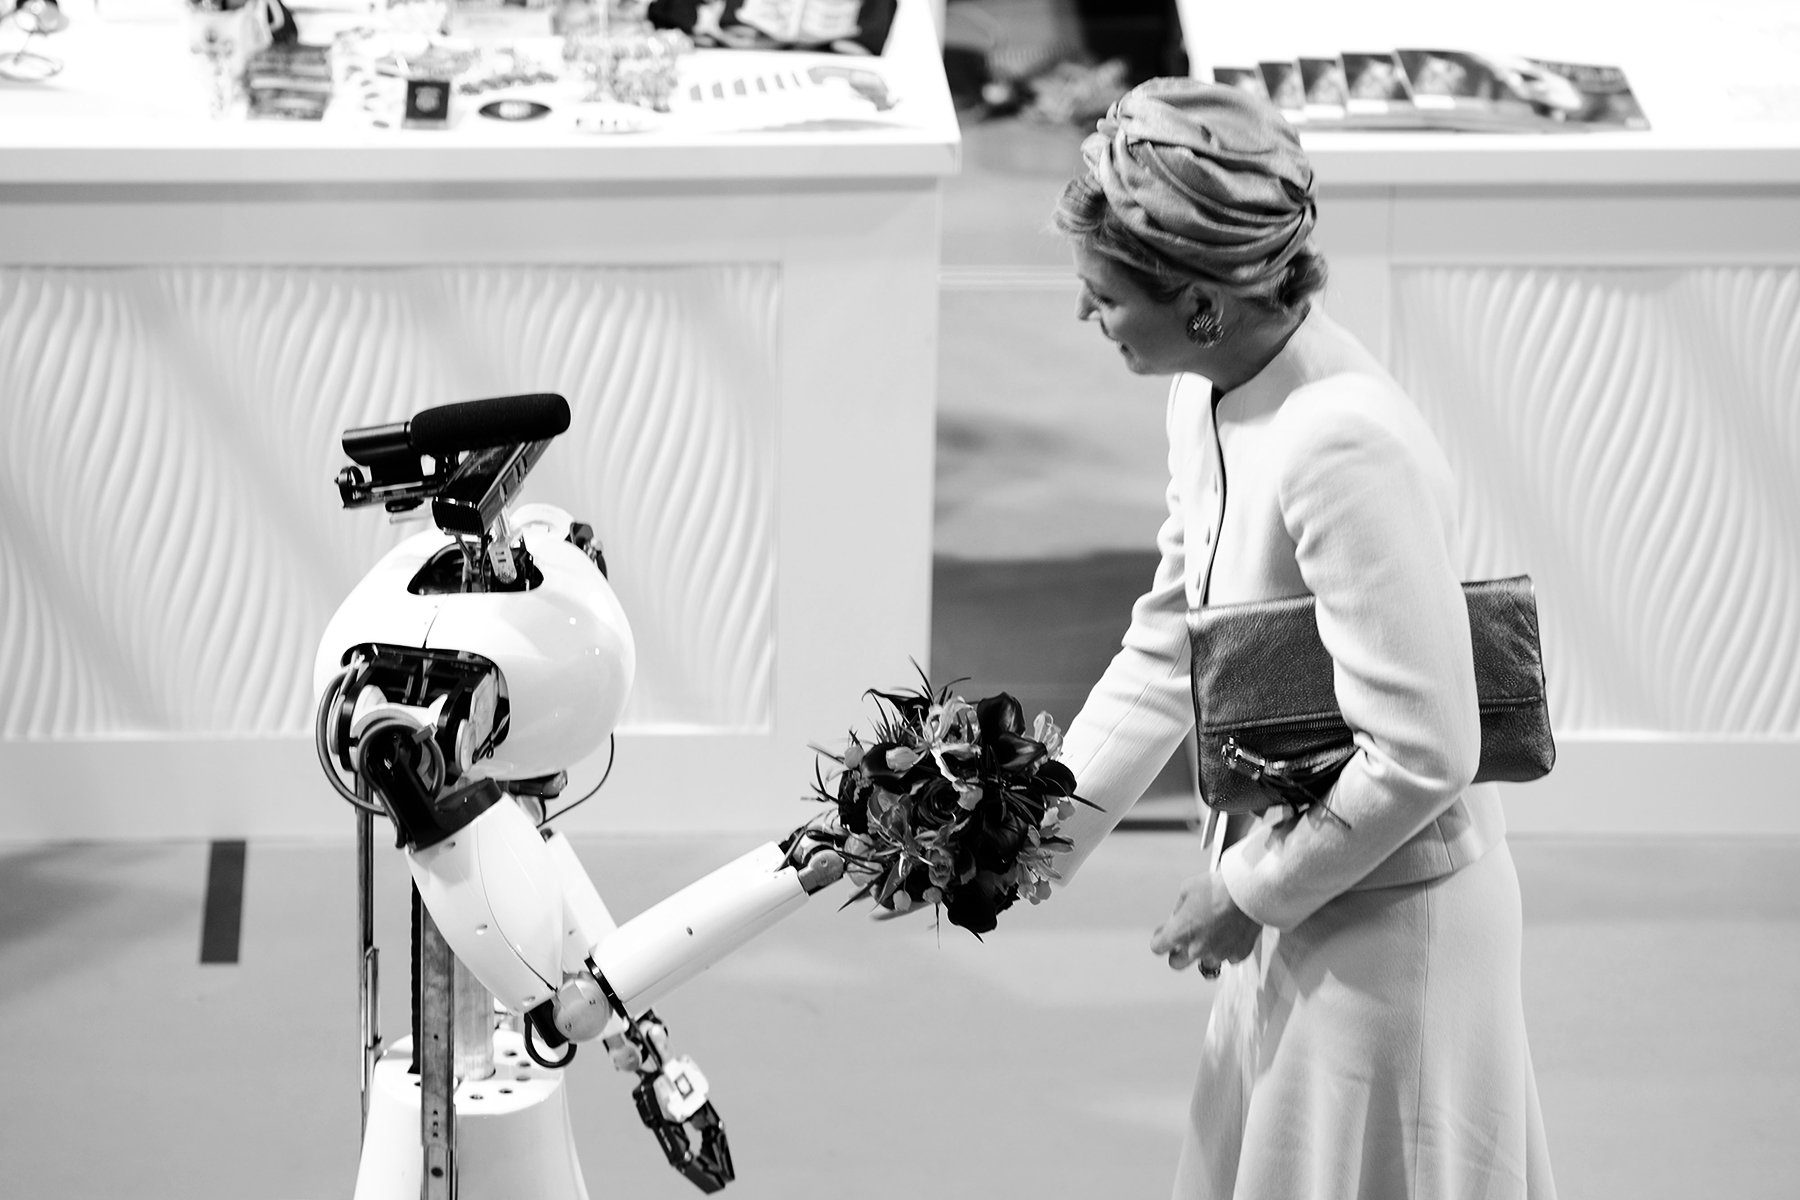 Maxima gets flowers from robot